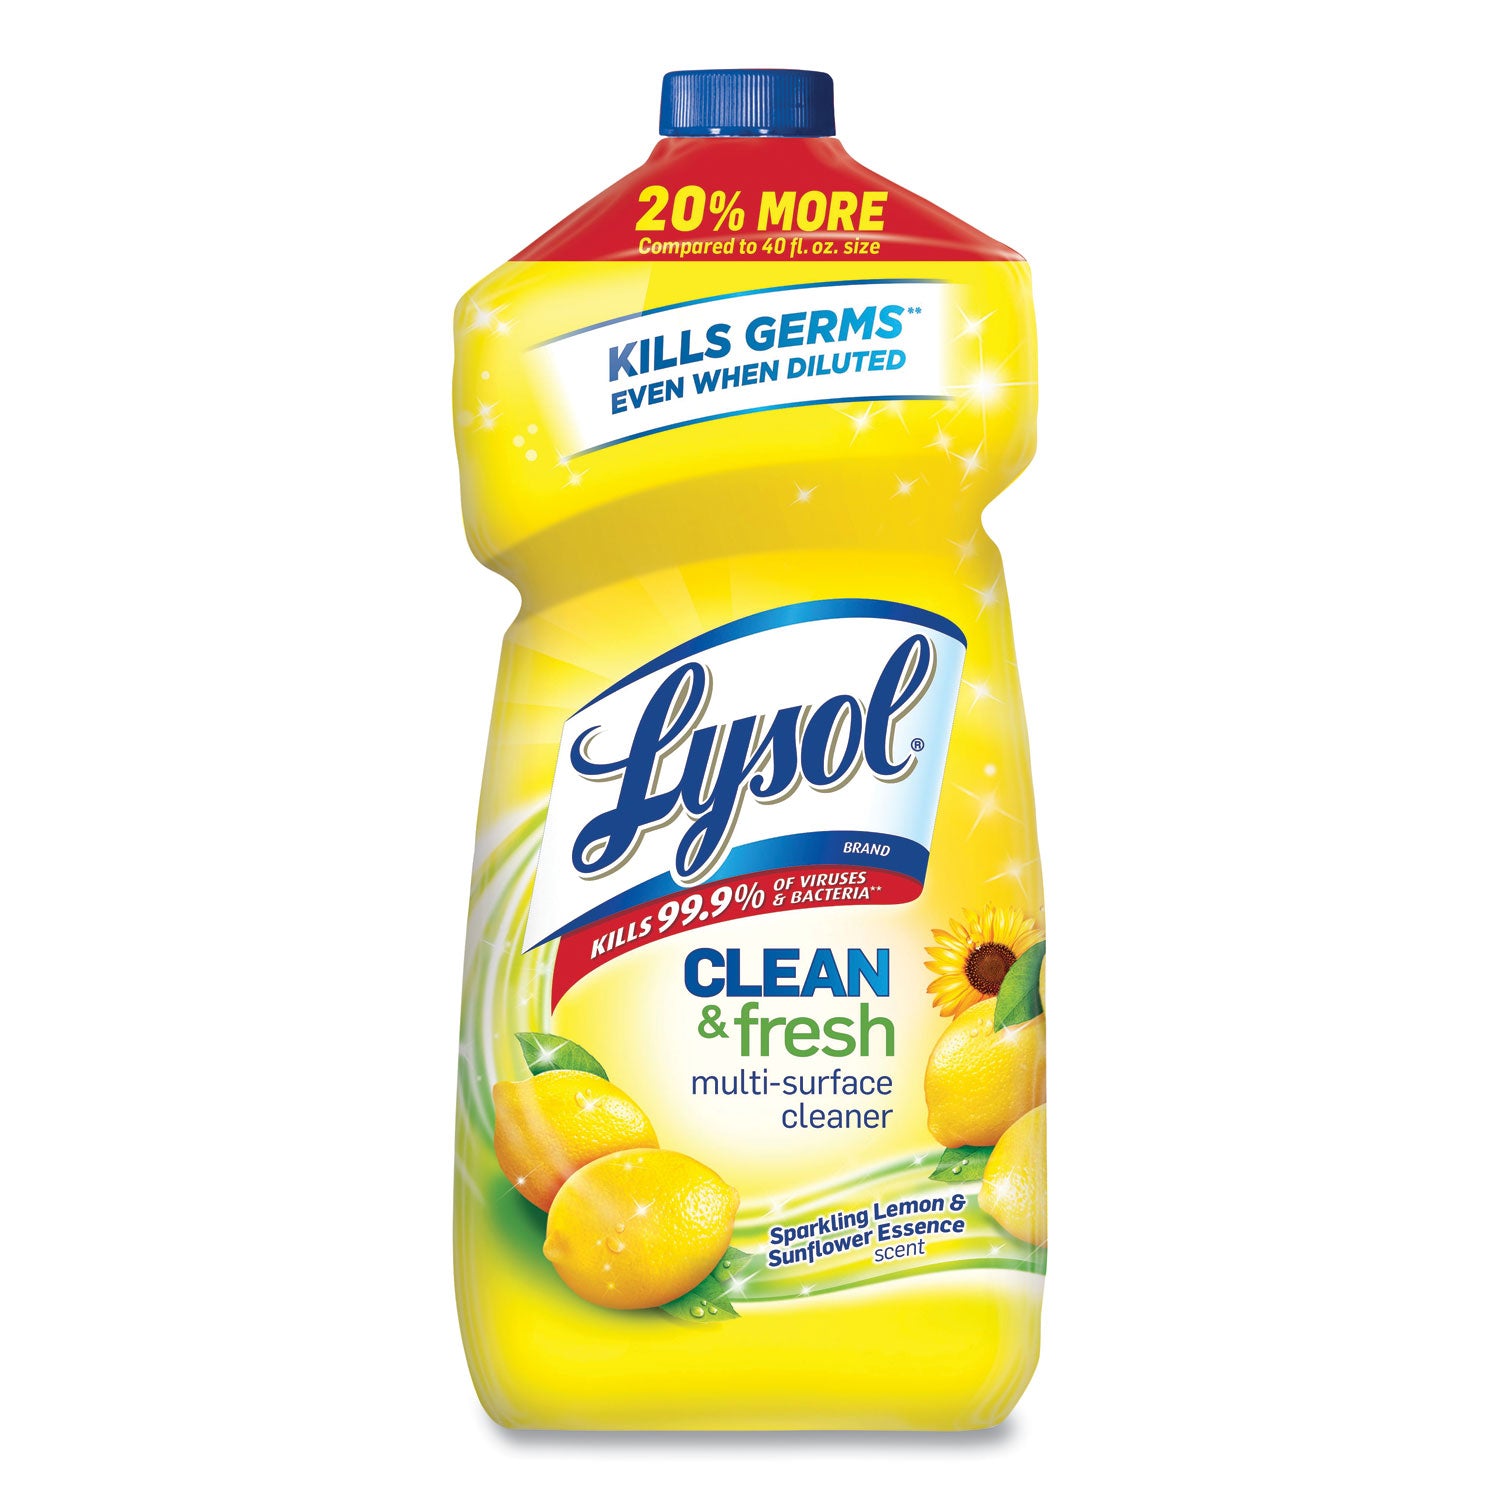 clean-and-fresh-multi-surface-cleaner-sparkling-lemon-and-sunflower-essence-48-oz-bottle-9-carton_rac89962ct - 1